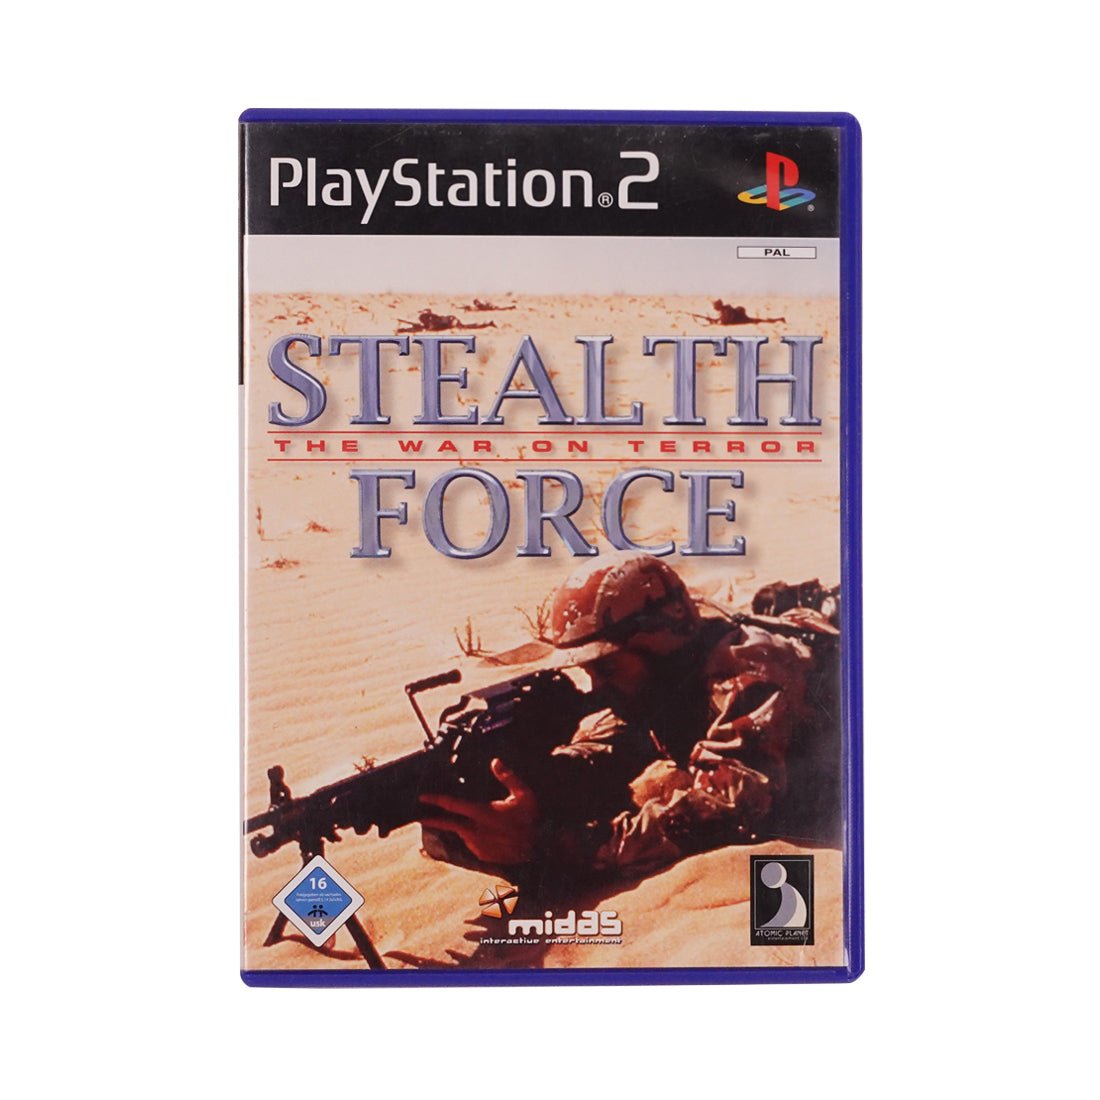 (Pre-Owned) Stealth Force: The War On Teror - PlayStation 2 - Store 974 | ستور ٩٧٤